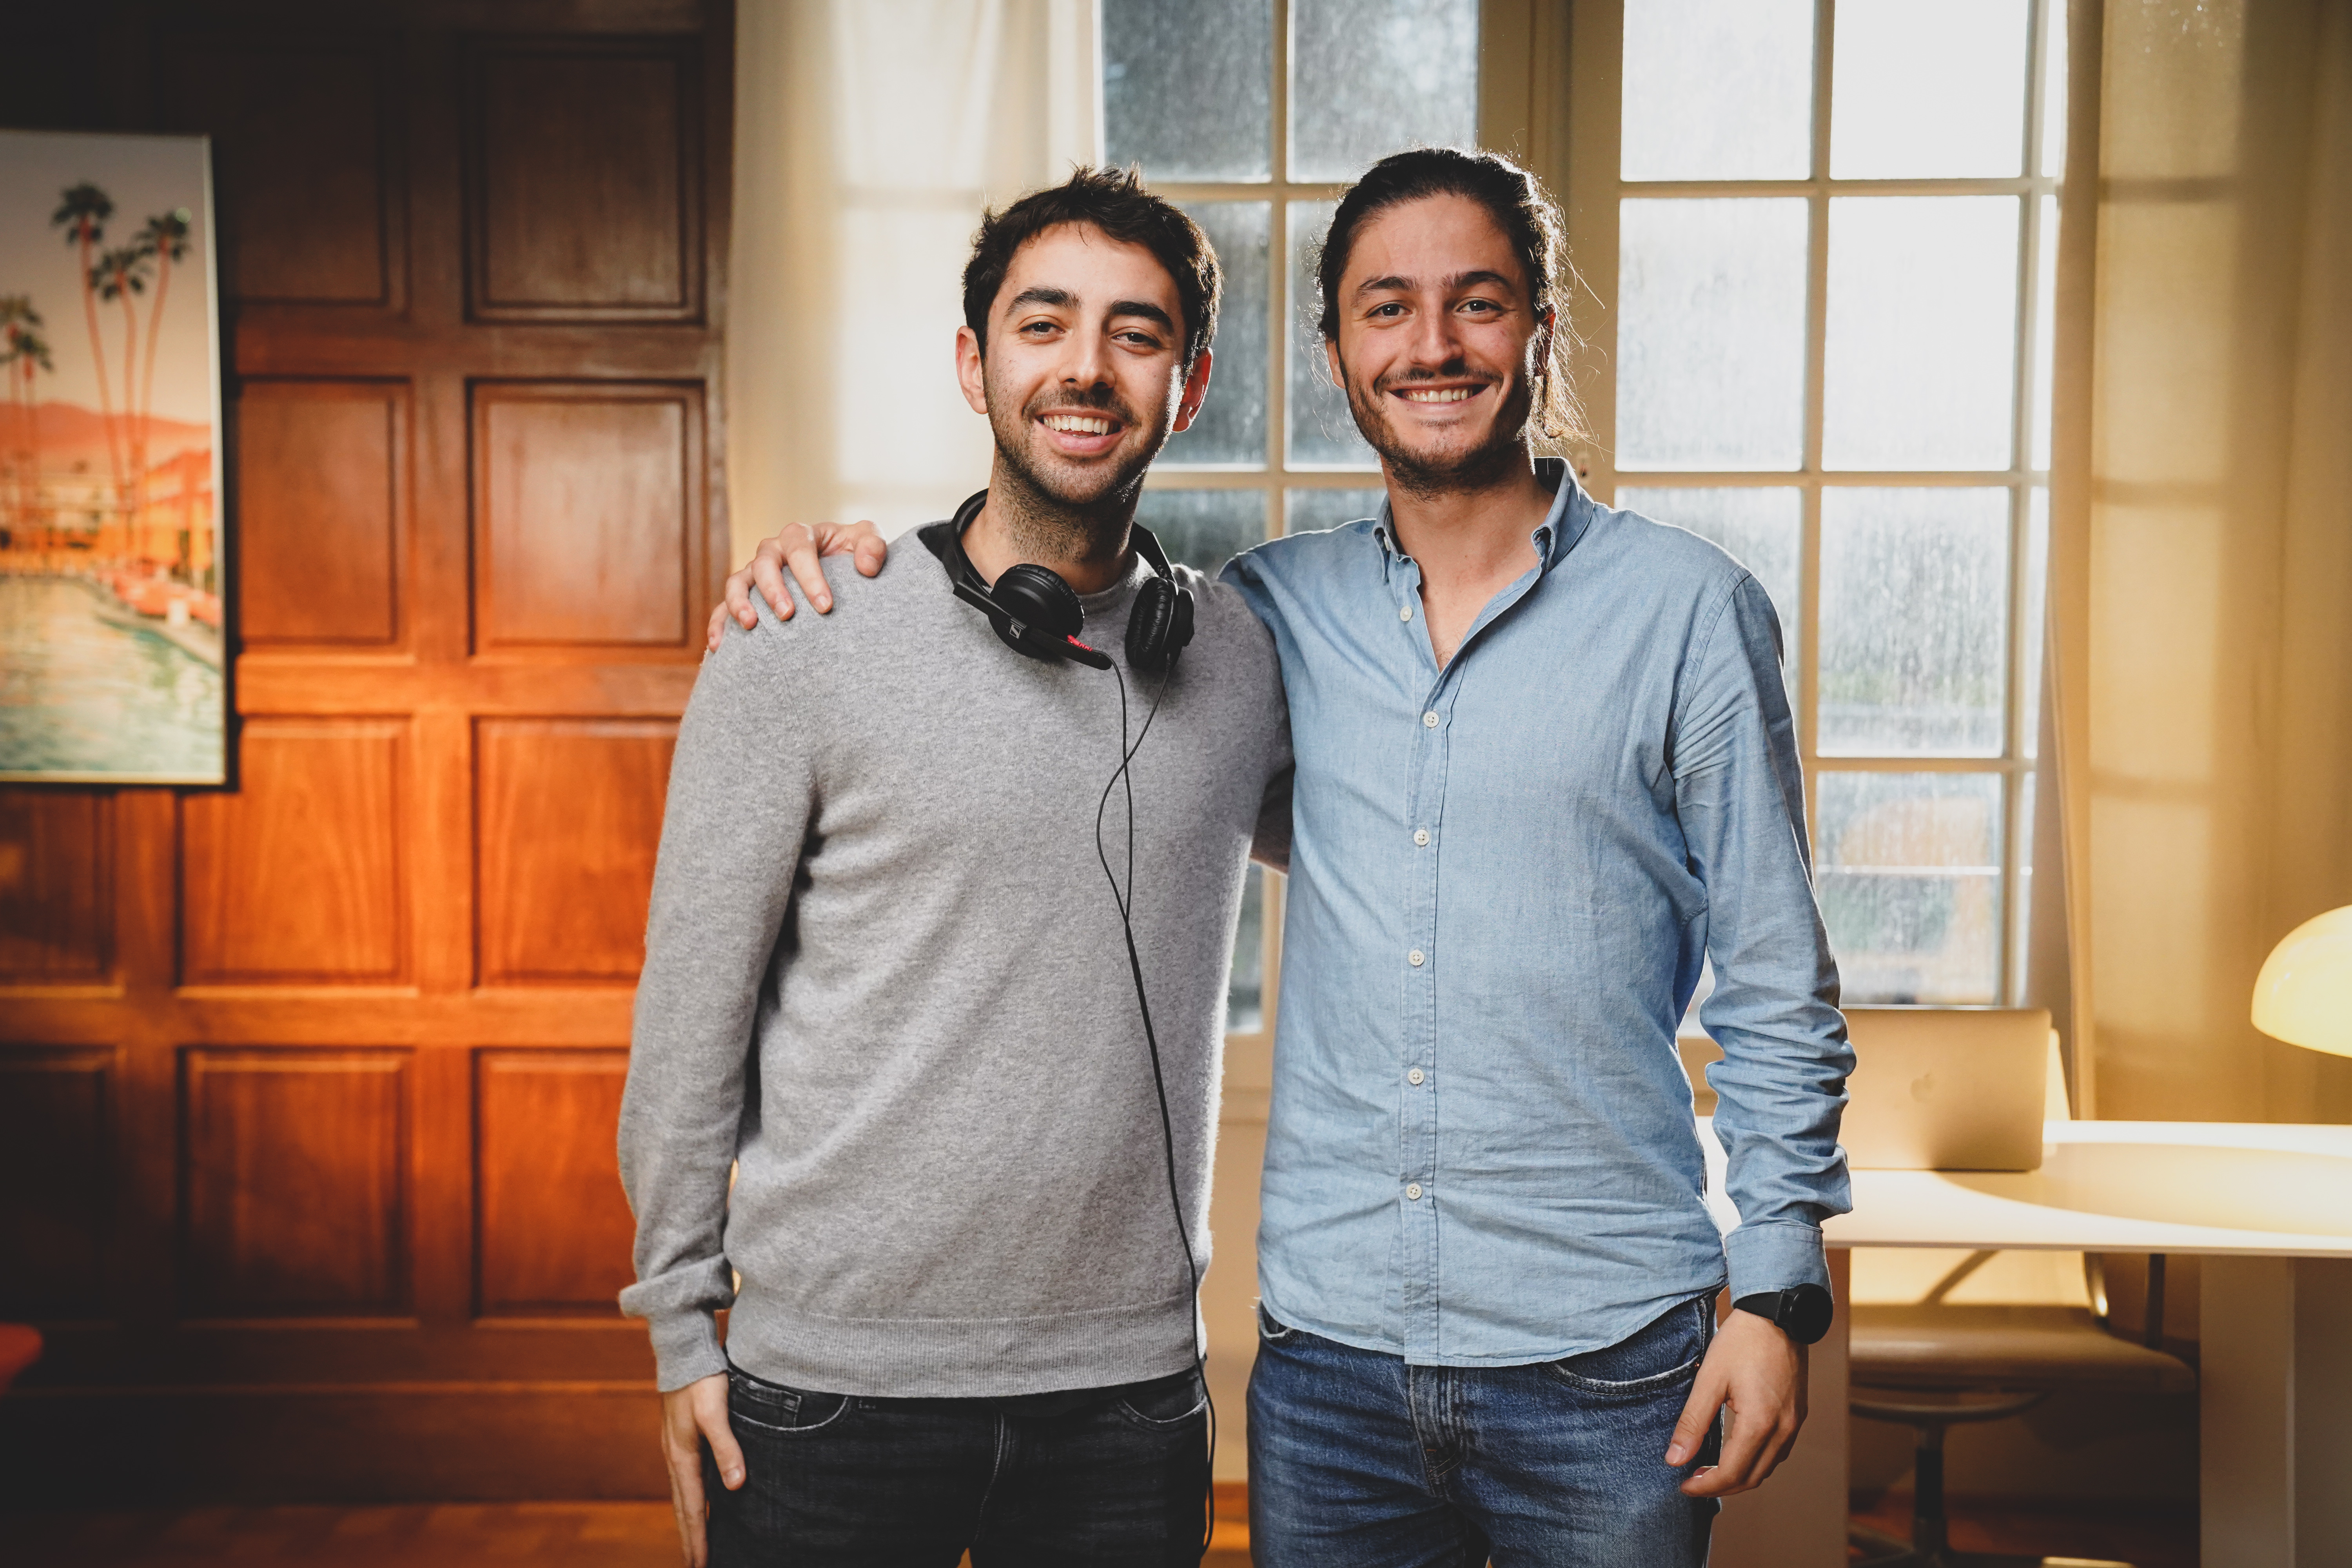 Augment co-founders Roy Wellner and Ariel Renous